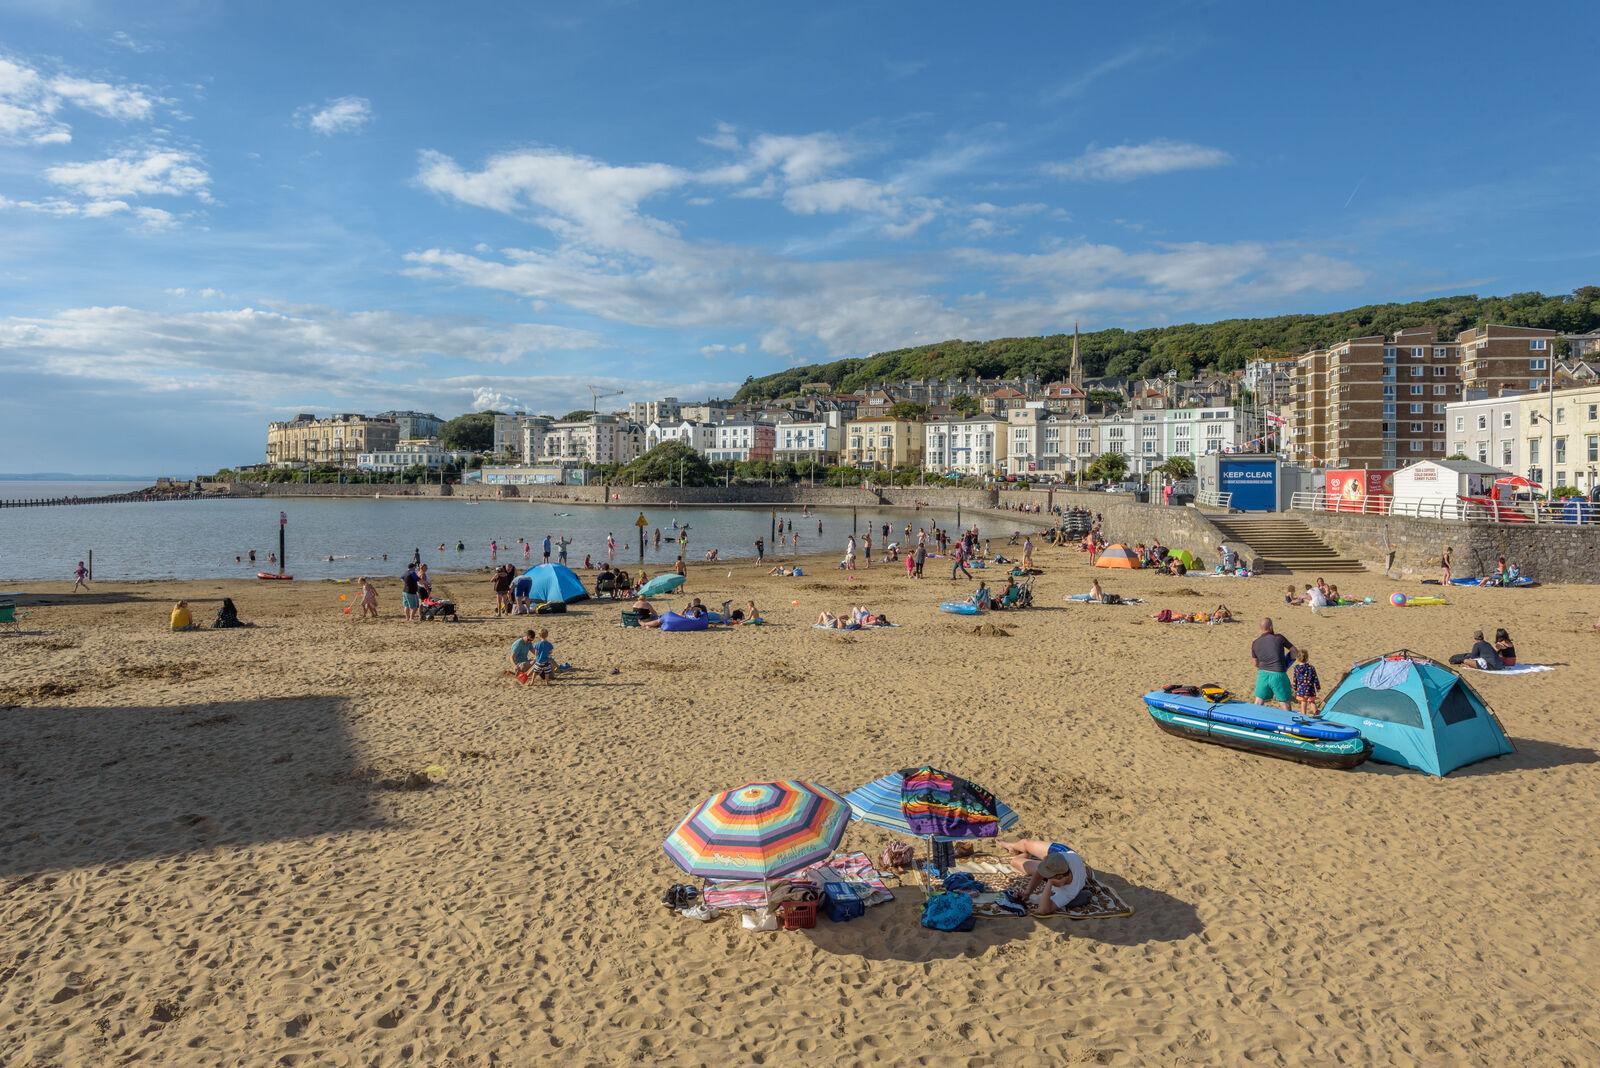 A wide angle shot of Marine Lake in Weston-super-Mare. A wide stretch of beach under a blue sky with a small lake visible to the left. People are dotted about on towels and swimming in the water. 